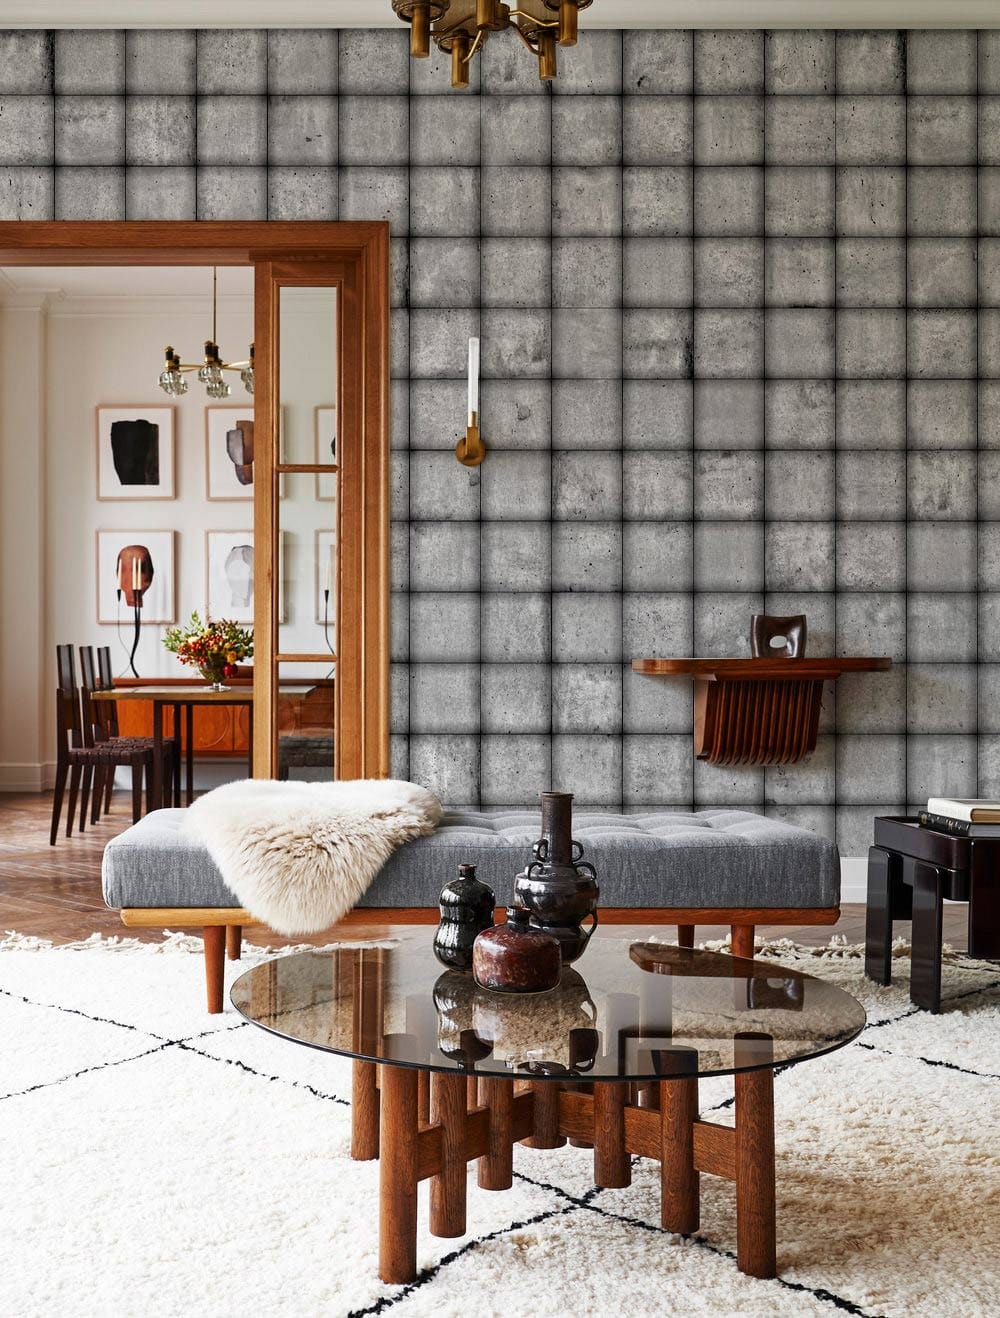 Living room wallpaper with a square brick pattern that is all its own.